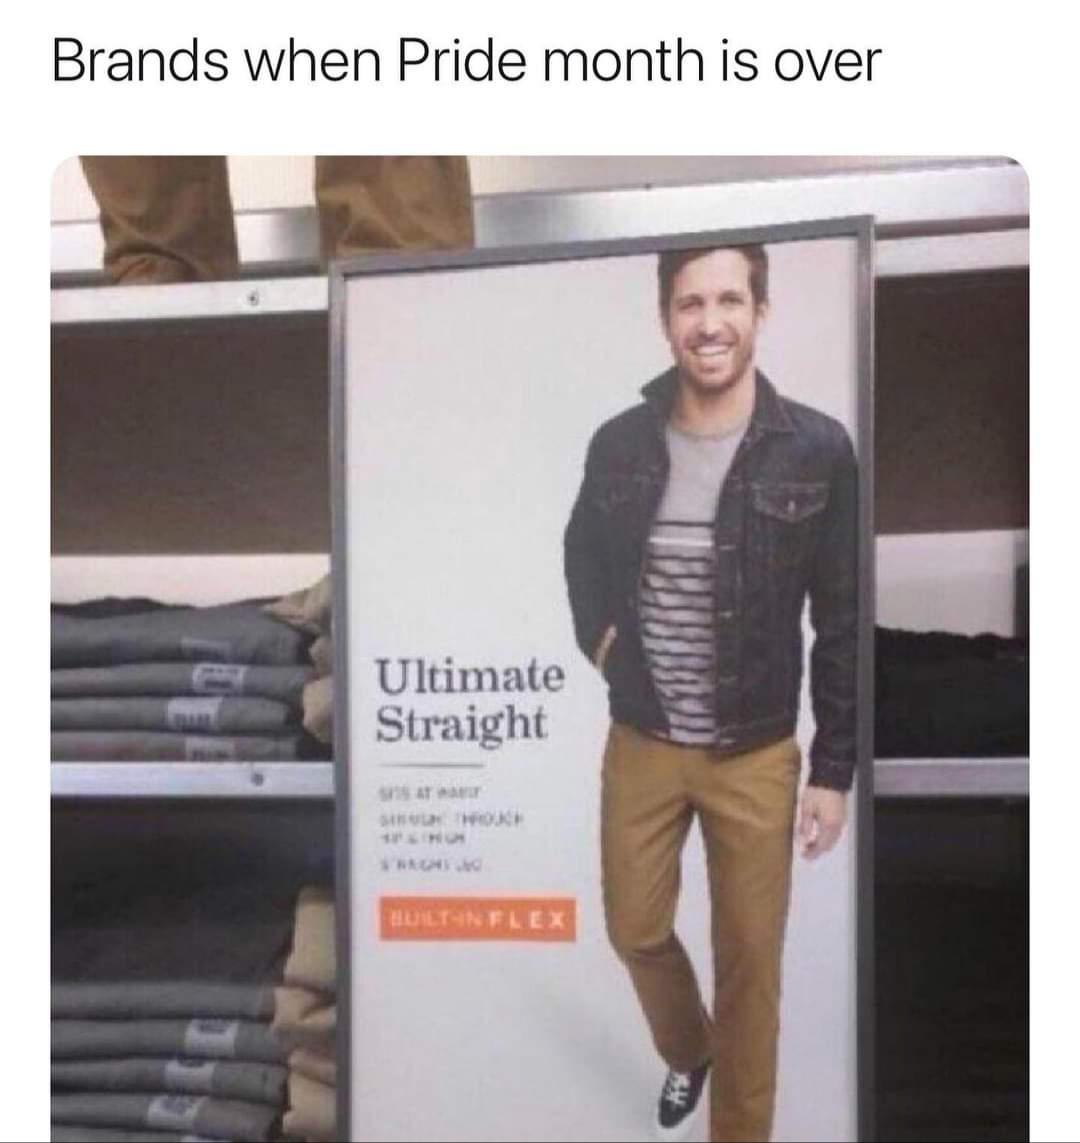 dank memes - ultimate straight - Brands when Pride month is over Ultimate Straight Sievhrouch BuiltIn Flex Bu